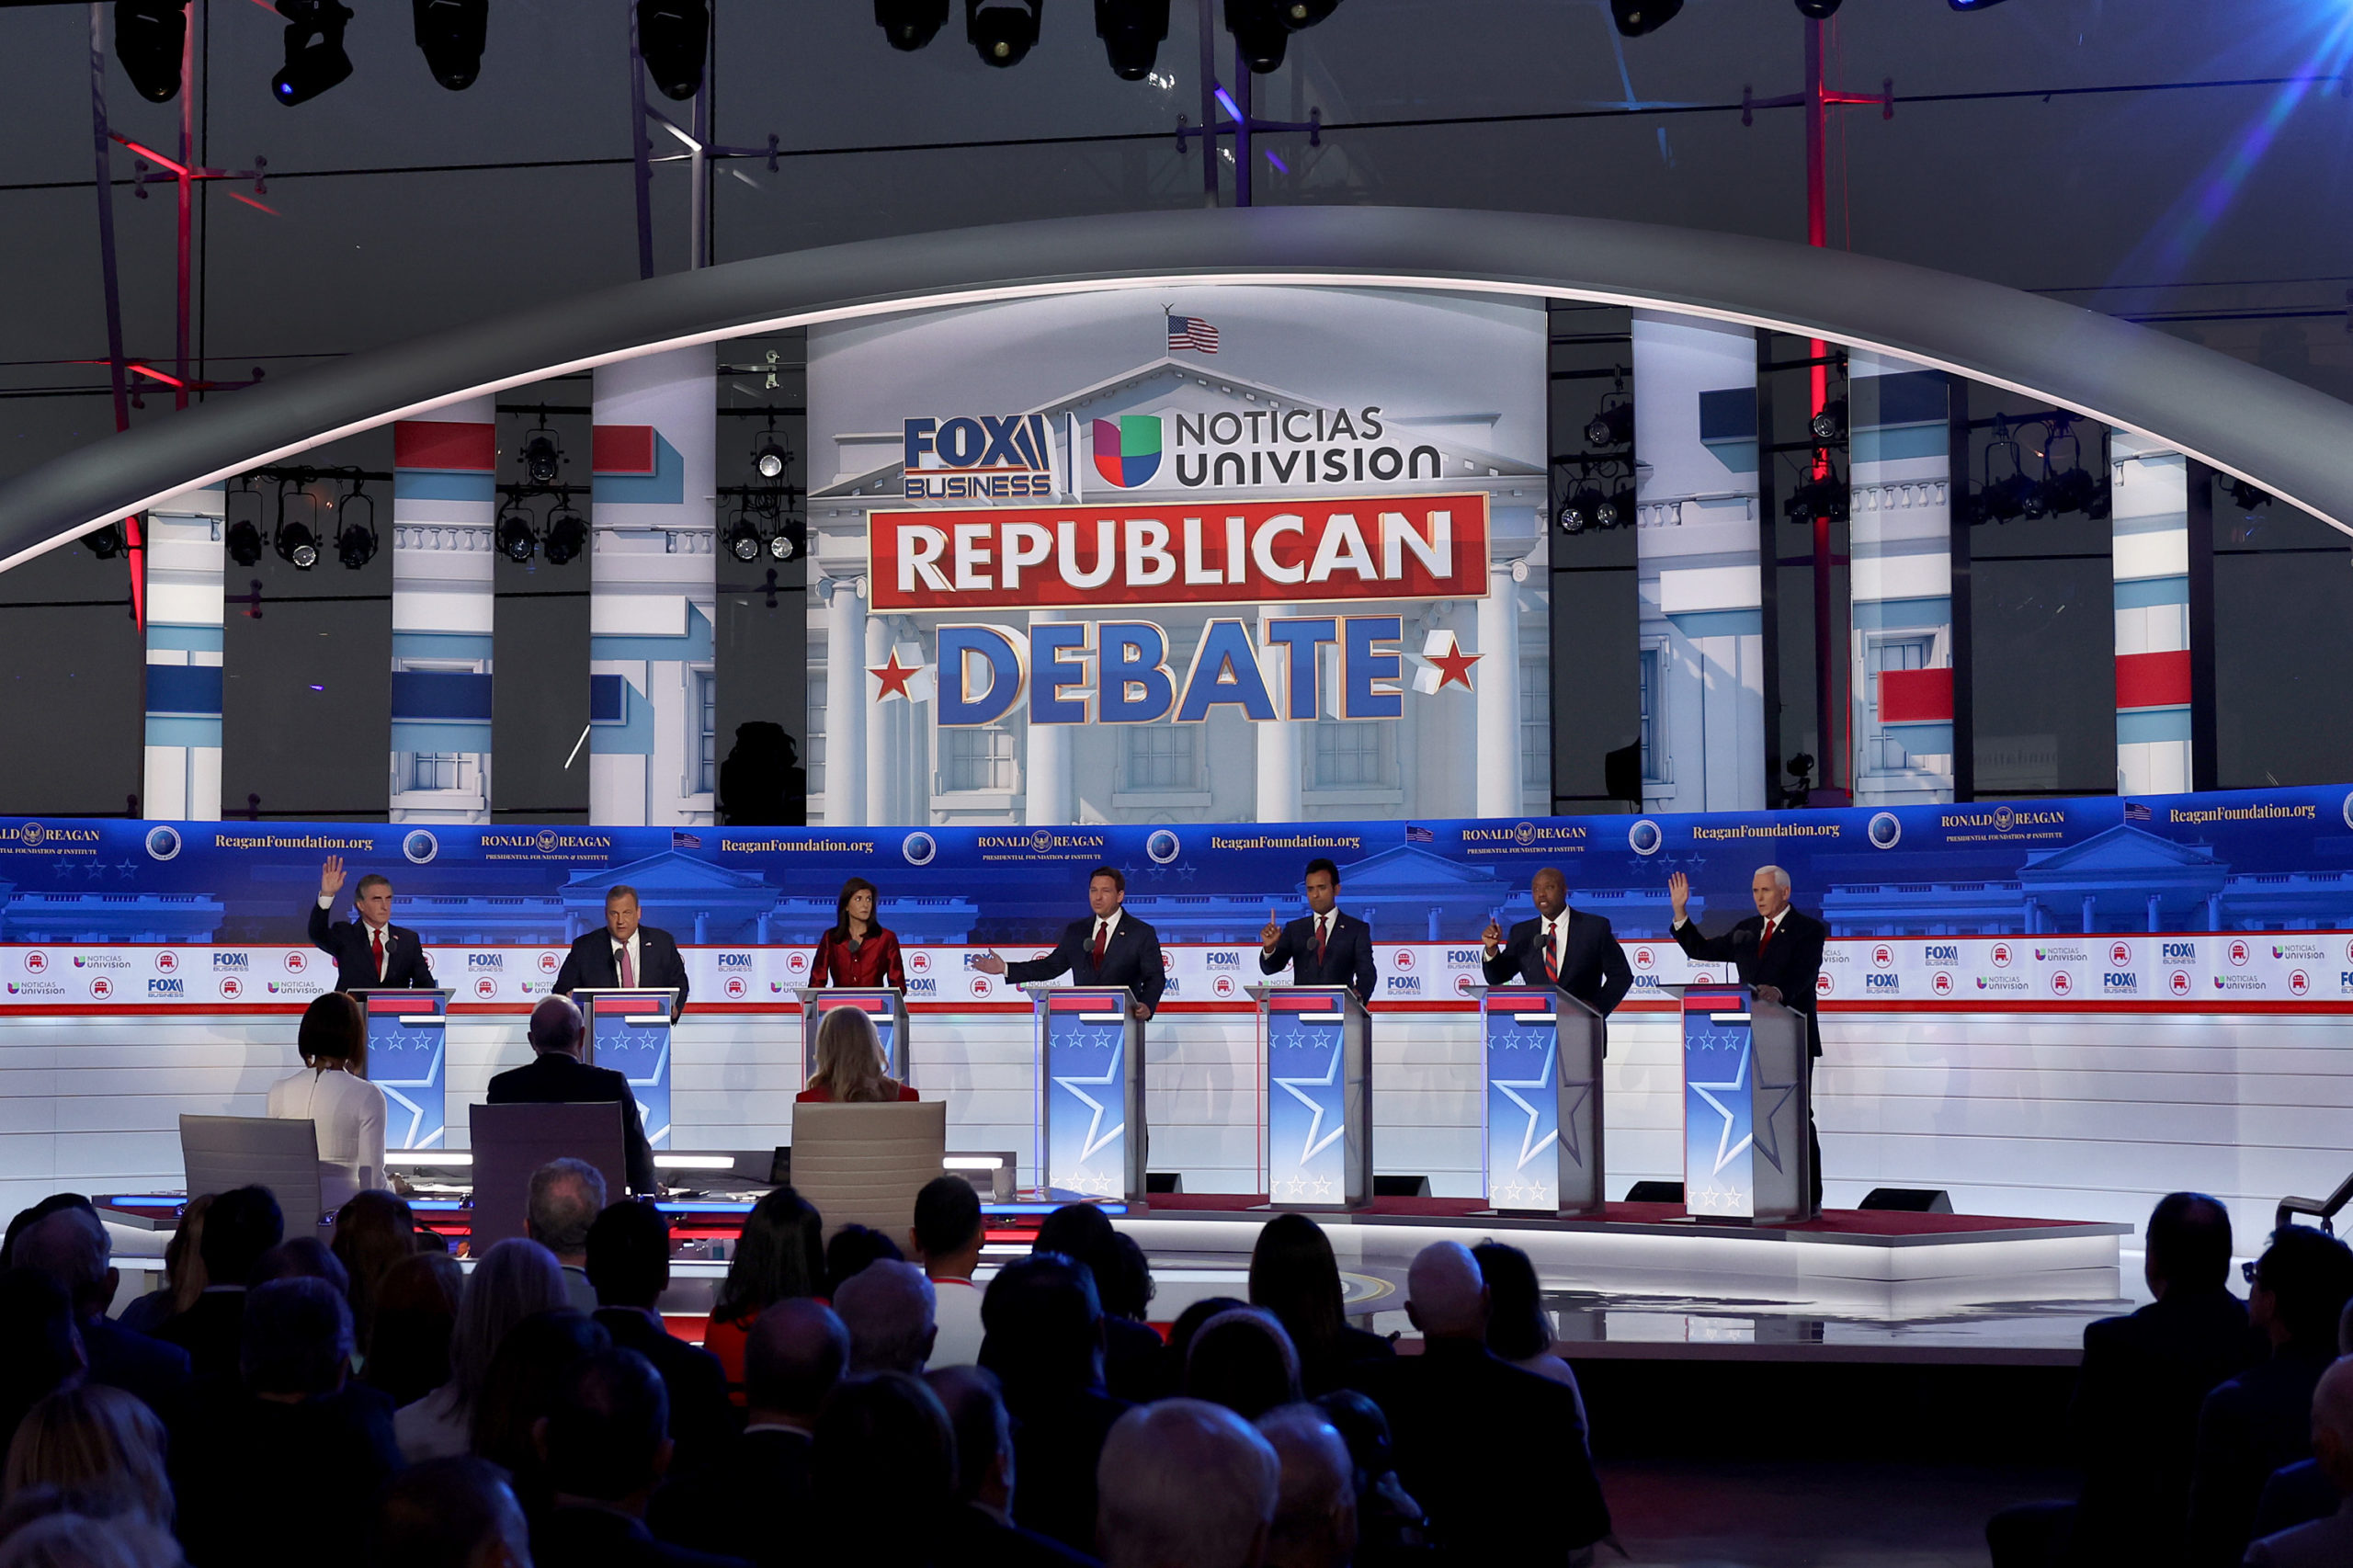 SIMI VALLEY, CALIFORNIA - SEPTEMBER 27: Republican presidential candidates (L-R), North Dakota Gov. Doug Burgum, former New Jersey Gov. Chris Christie, former U.N. Ambassador Nikki Haley, Florida Gov. Ron DeSantis, Vivek Ramaswamy, U.S. Sen. Tim Scott (R-SC) and former U.S. Vice President Mike Pence participate in the FOX Business Republican Primary Debate at the Ronald Reagan Presidential Library on September 27, 2023 in Simi Valley, California. Seven presidential hopefuls squared off in the second Republican primary debate as former U.S. President Donald Trump, currently facing indictments in four locations, declined again to participate. (Photo by Justin Sullivan/Getty Images)